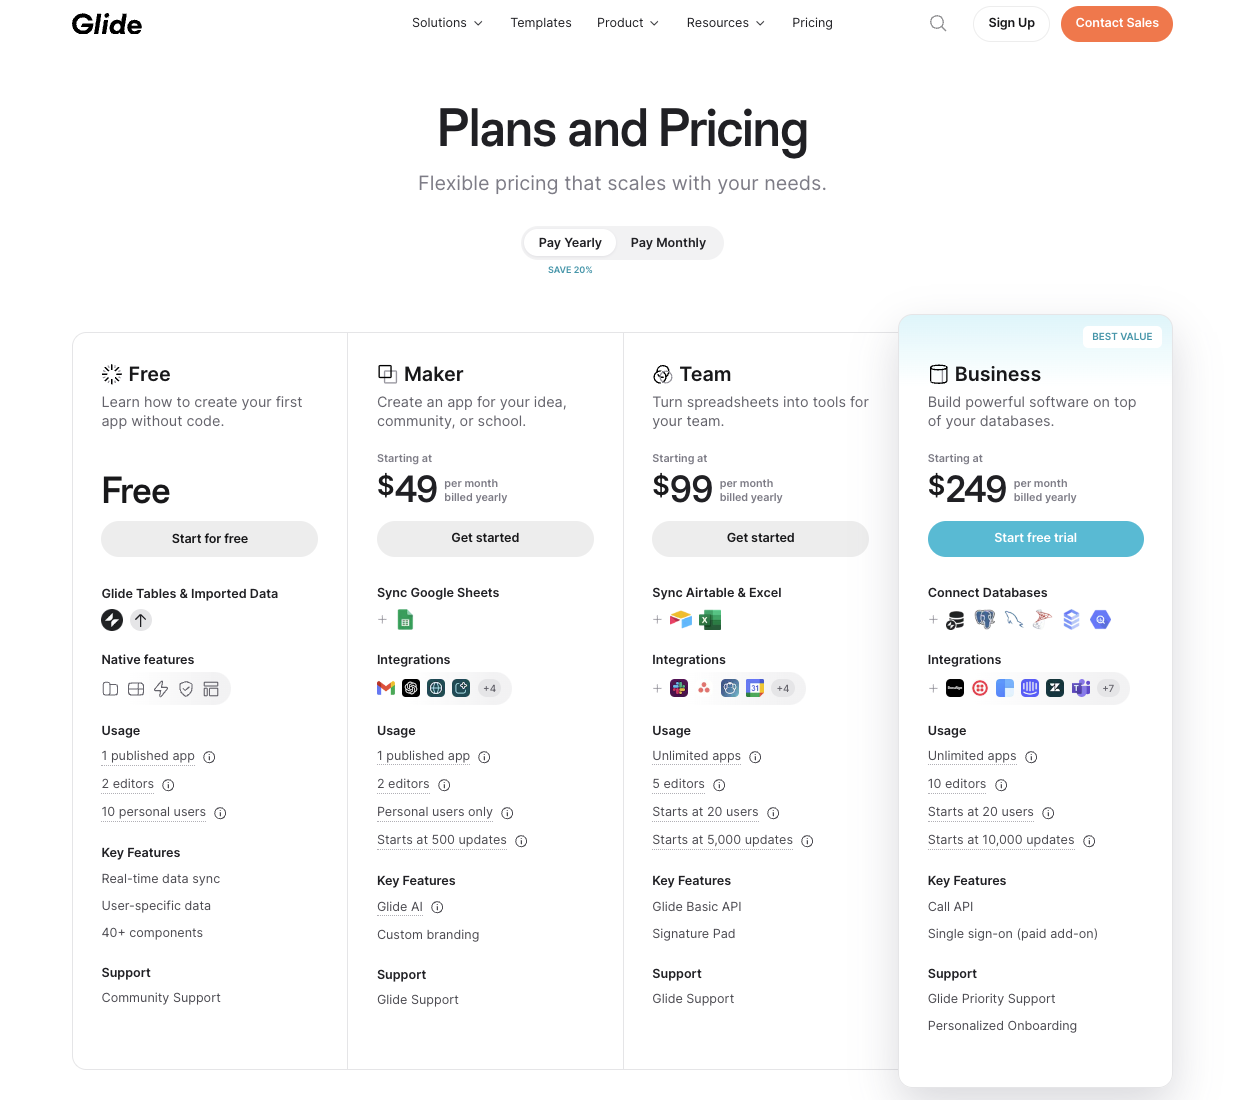 An example of a pricing page from Glide